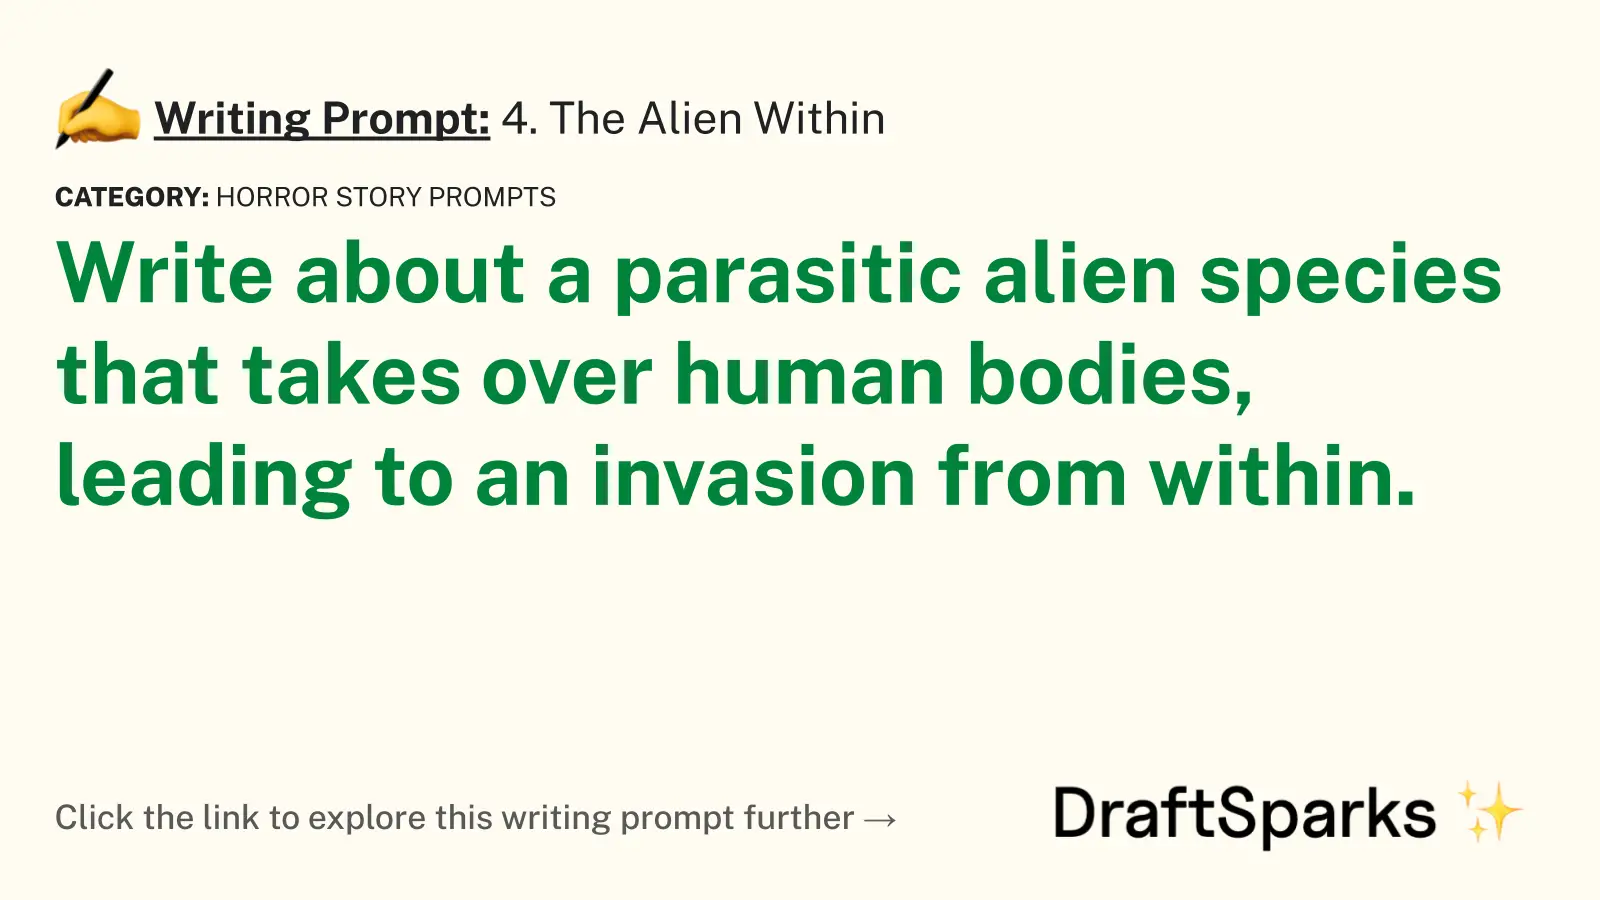 4. The Alien Within